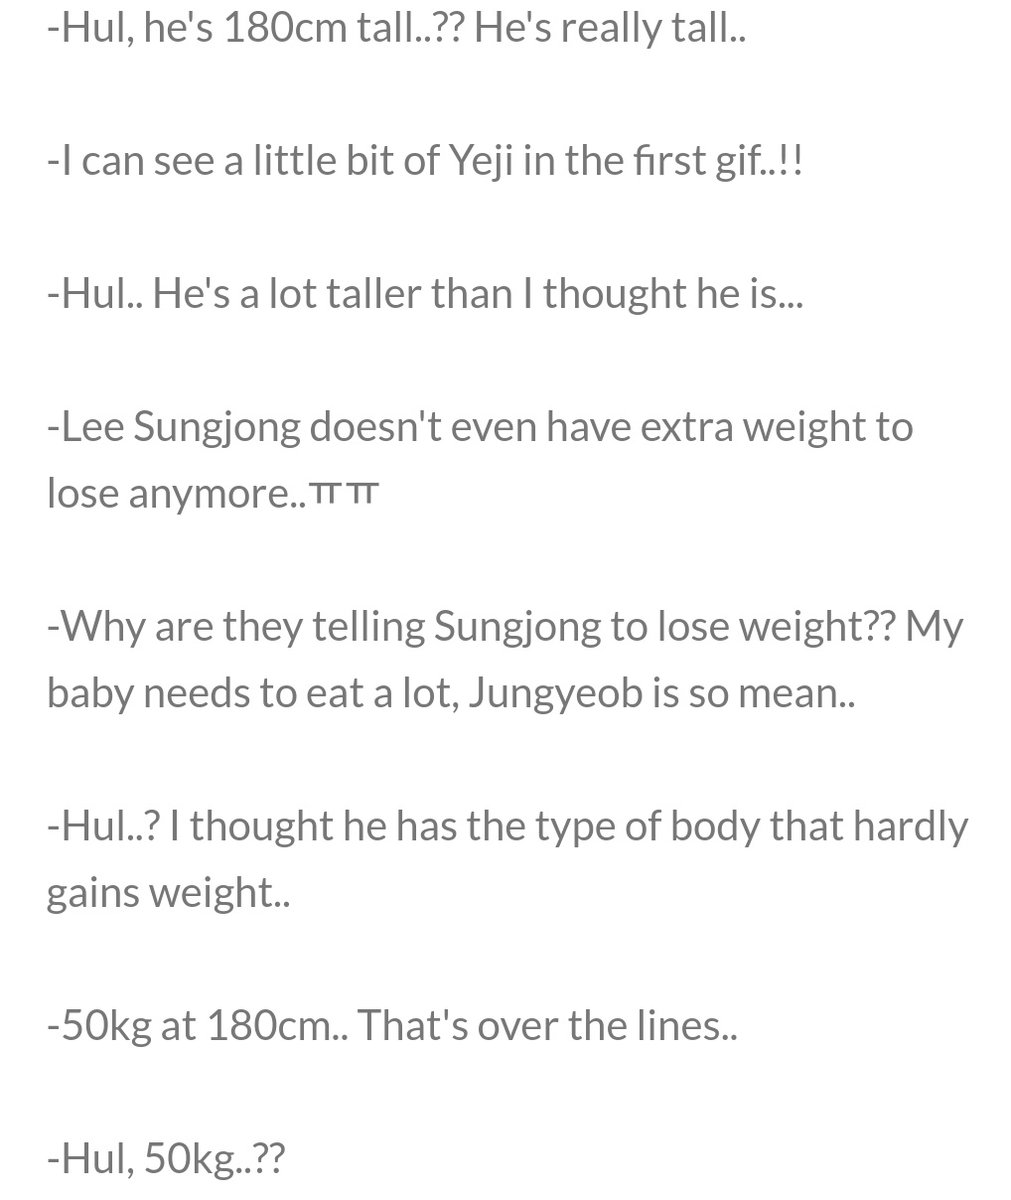 Woollim made sungjong lose A LOT of weight (this became very known to the public during The Eye era) --> more sources in next tweet in thread